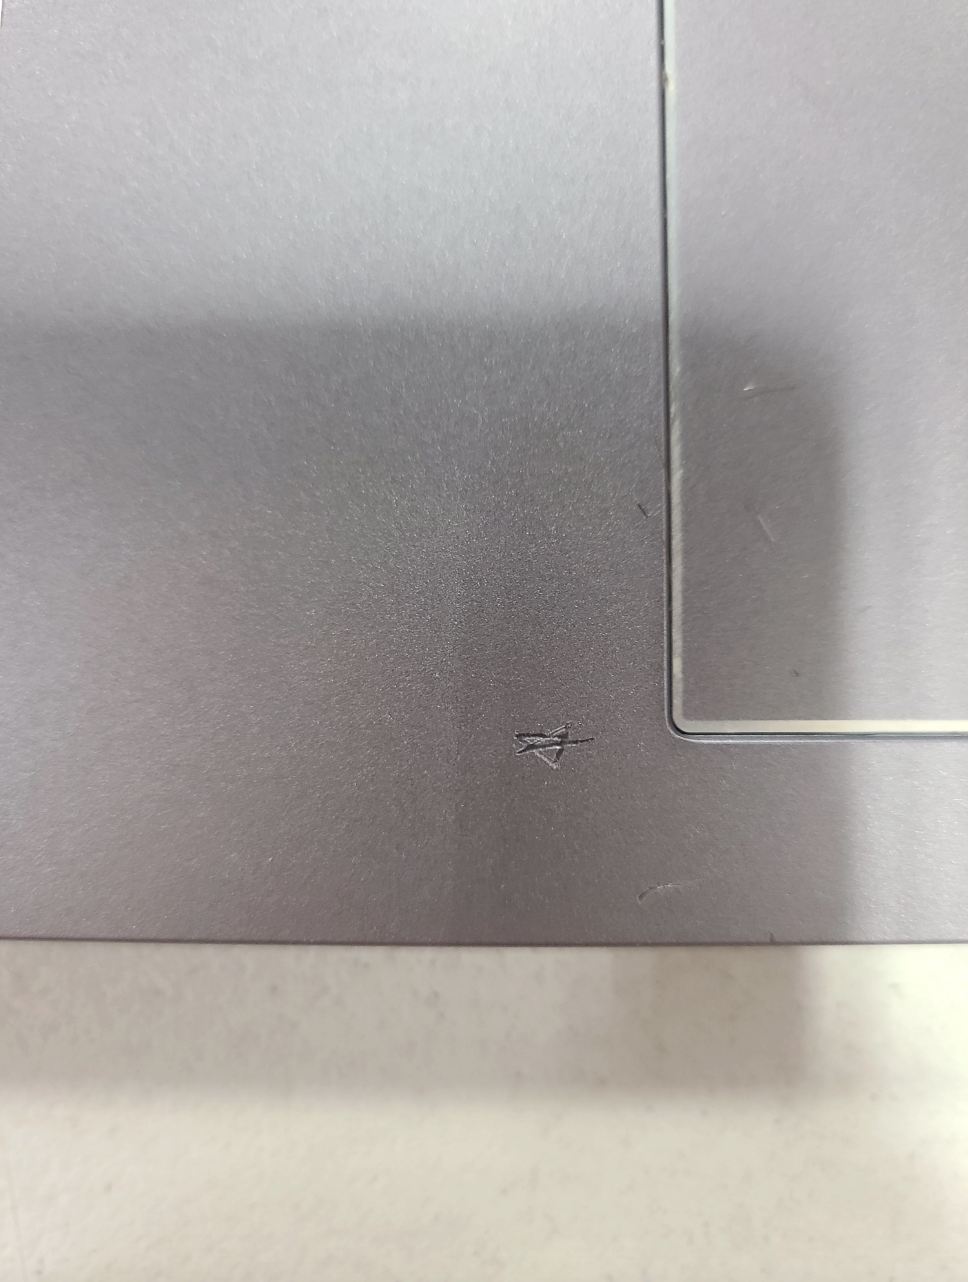 The surface has a triangle carved into it